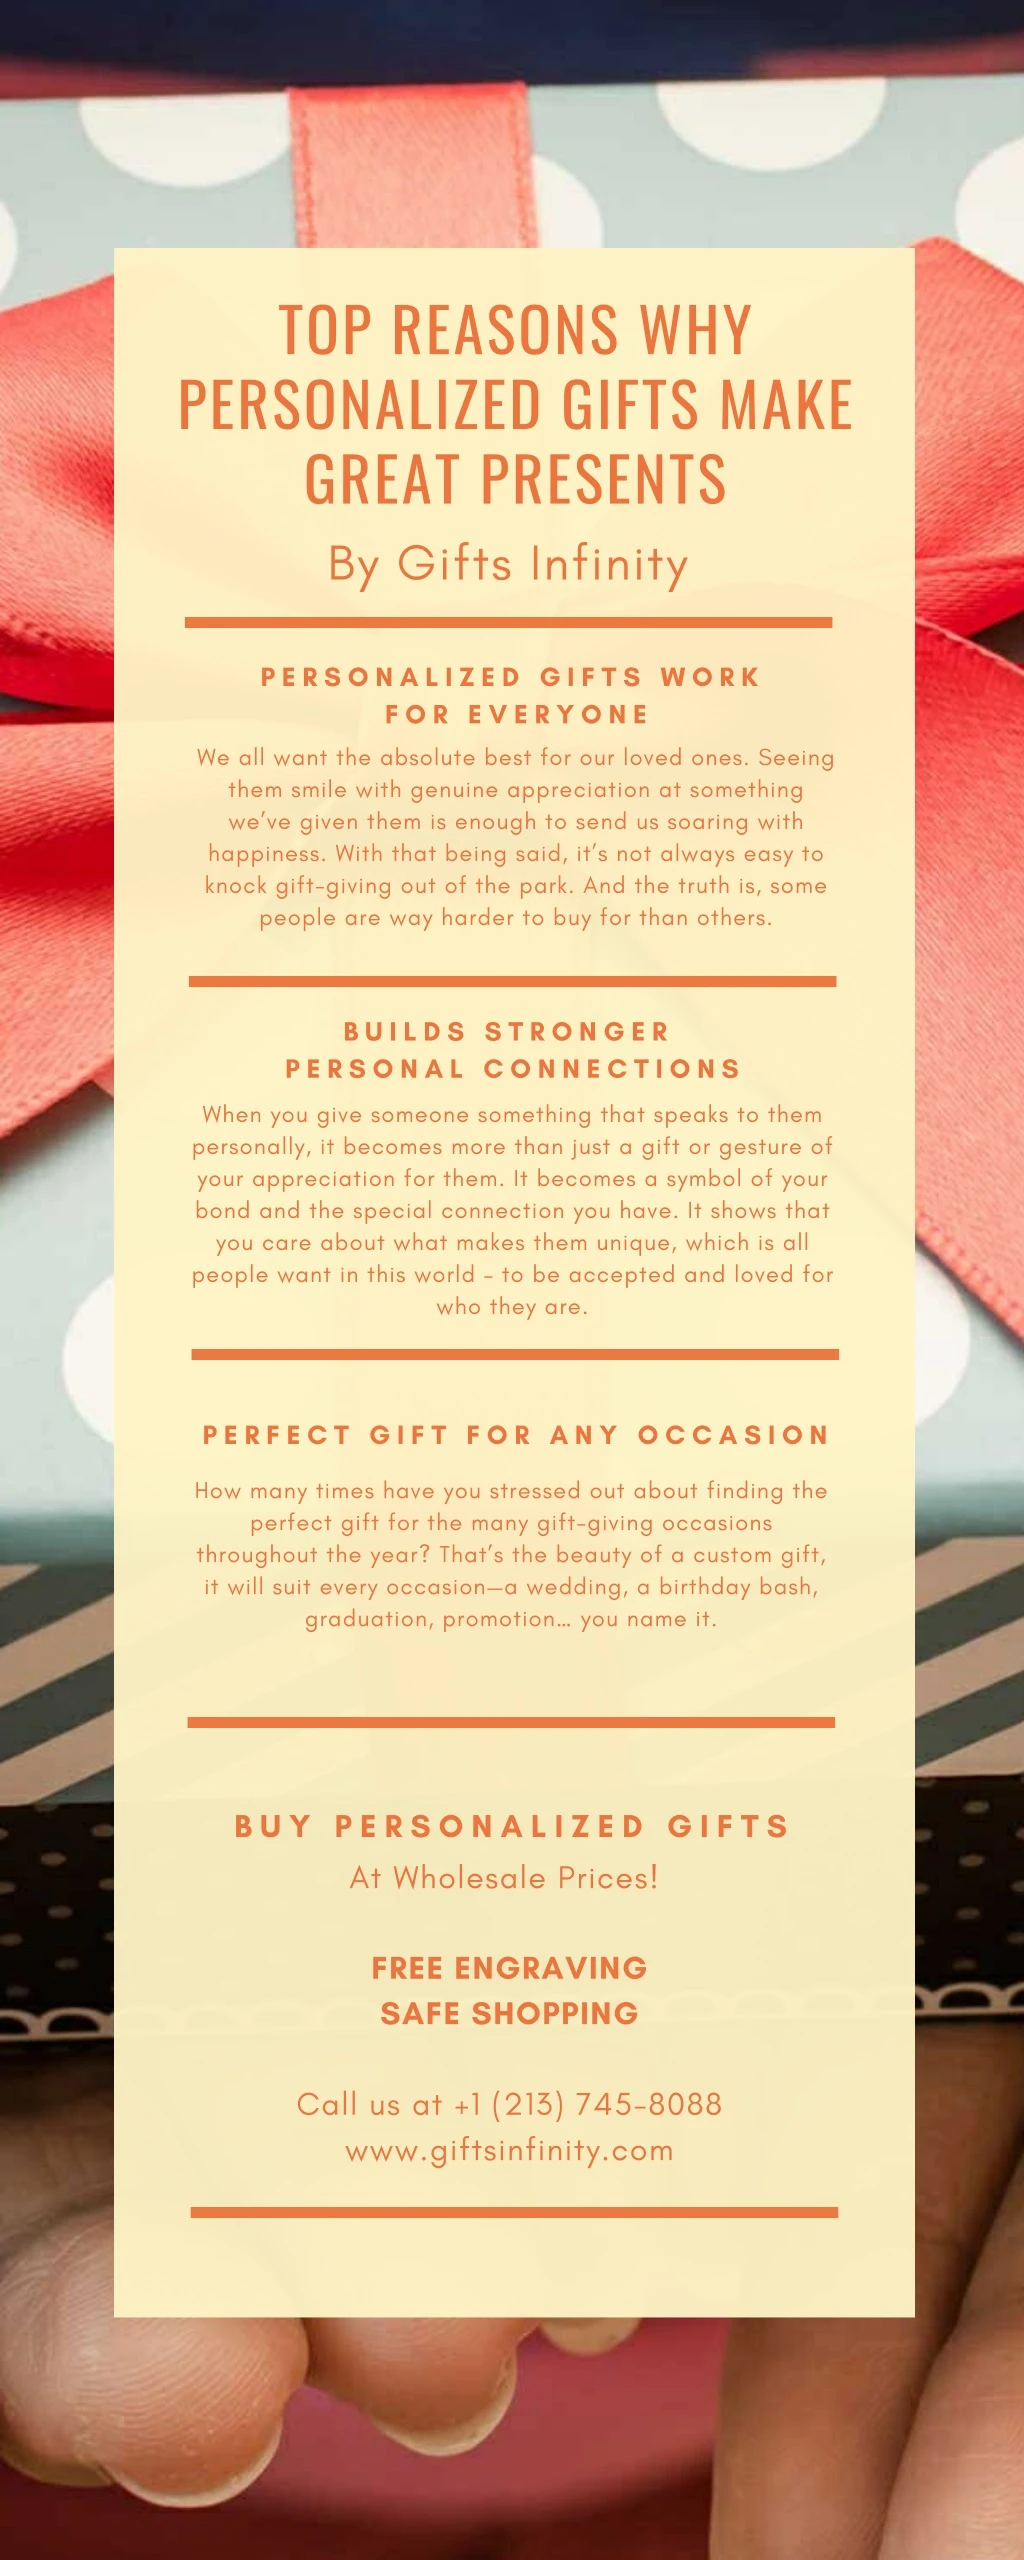 top reasons why personalized gifts make great